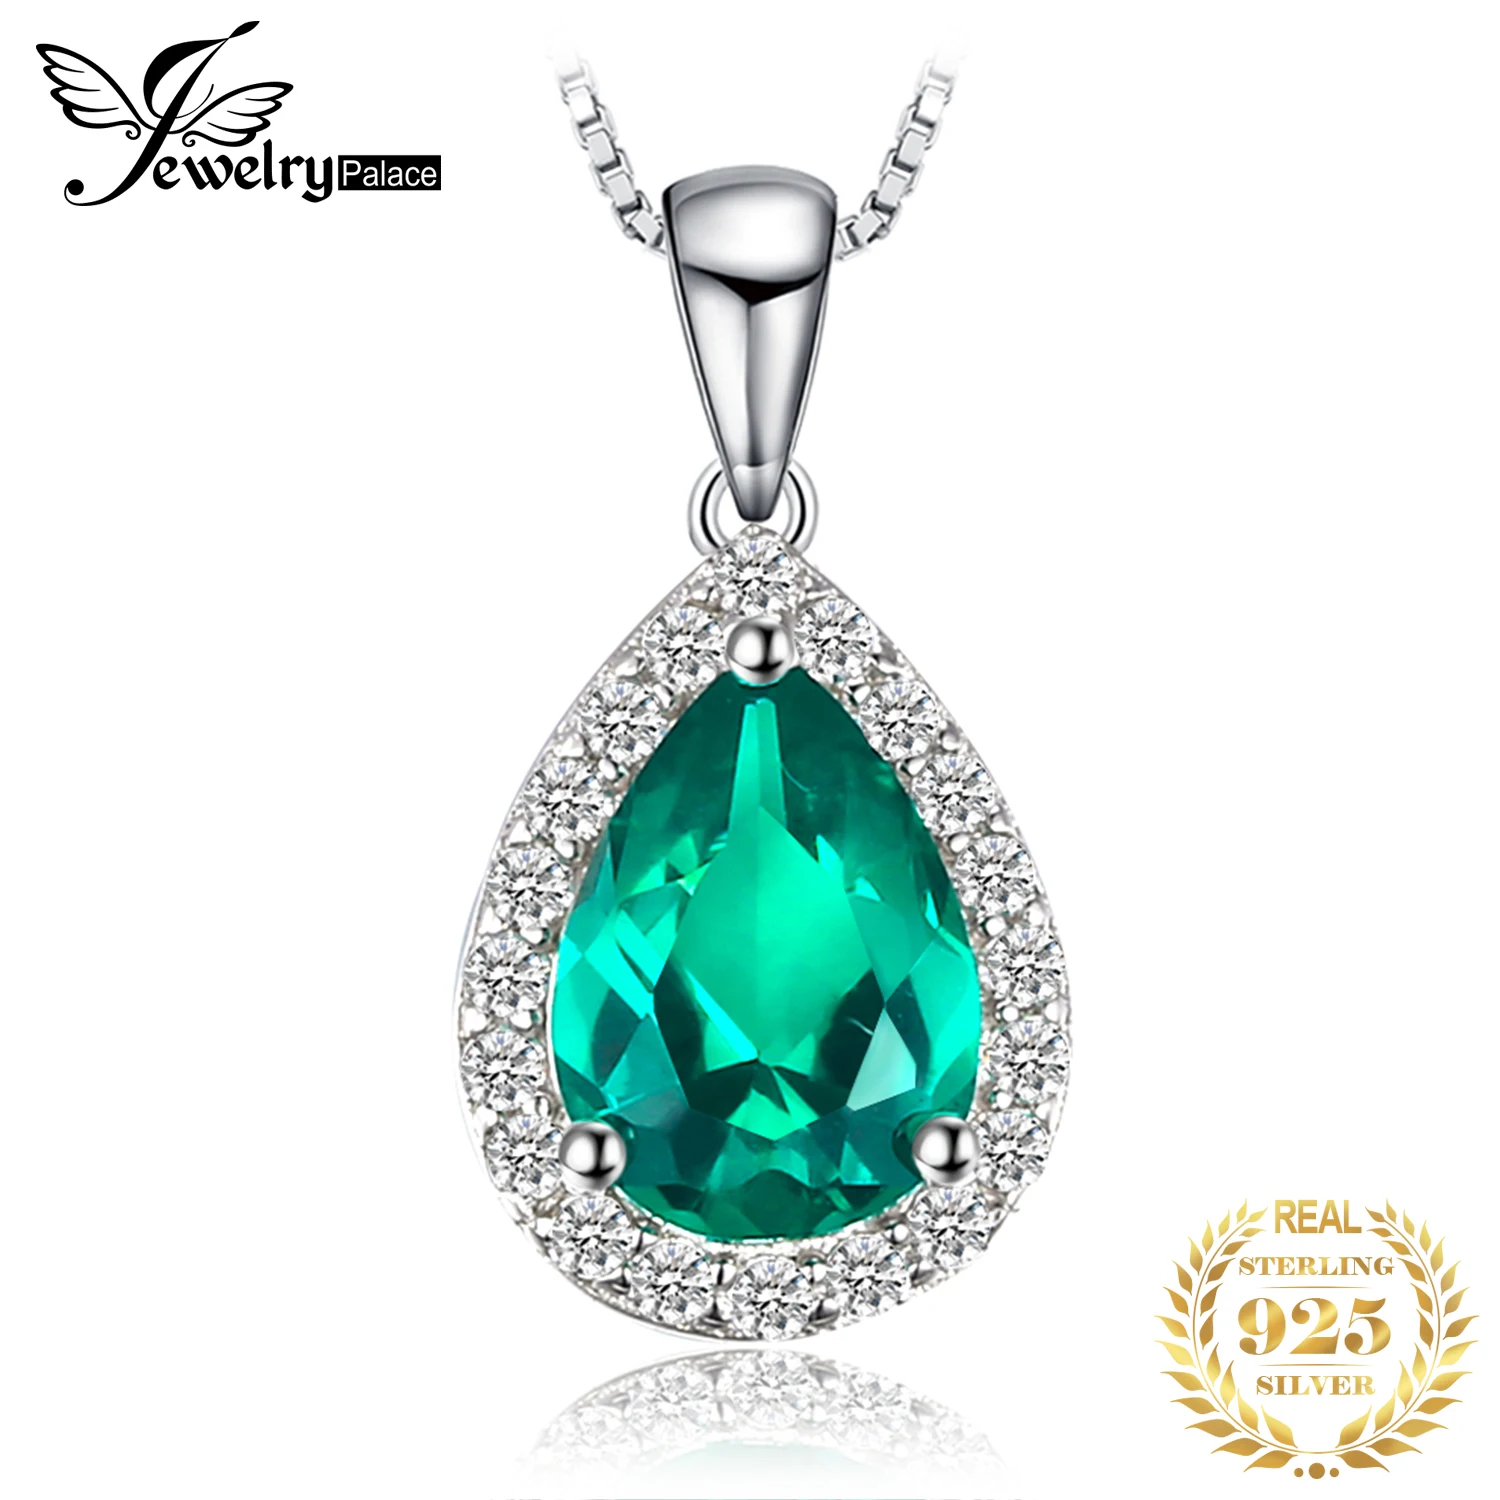 

JewelryPalace Pear Simulated Nano Emerald 925 Sterling Silver Pendant Necklace Gemstone Statement Necklace Women Without Chain